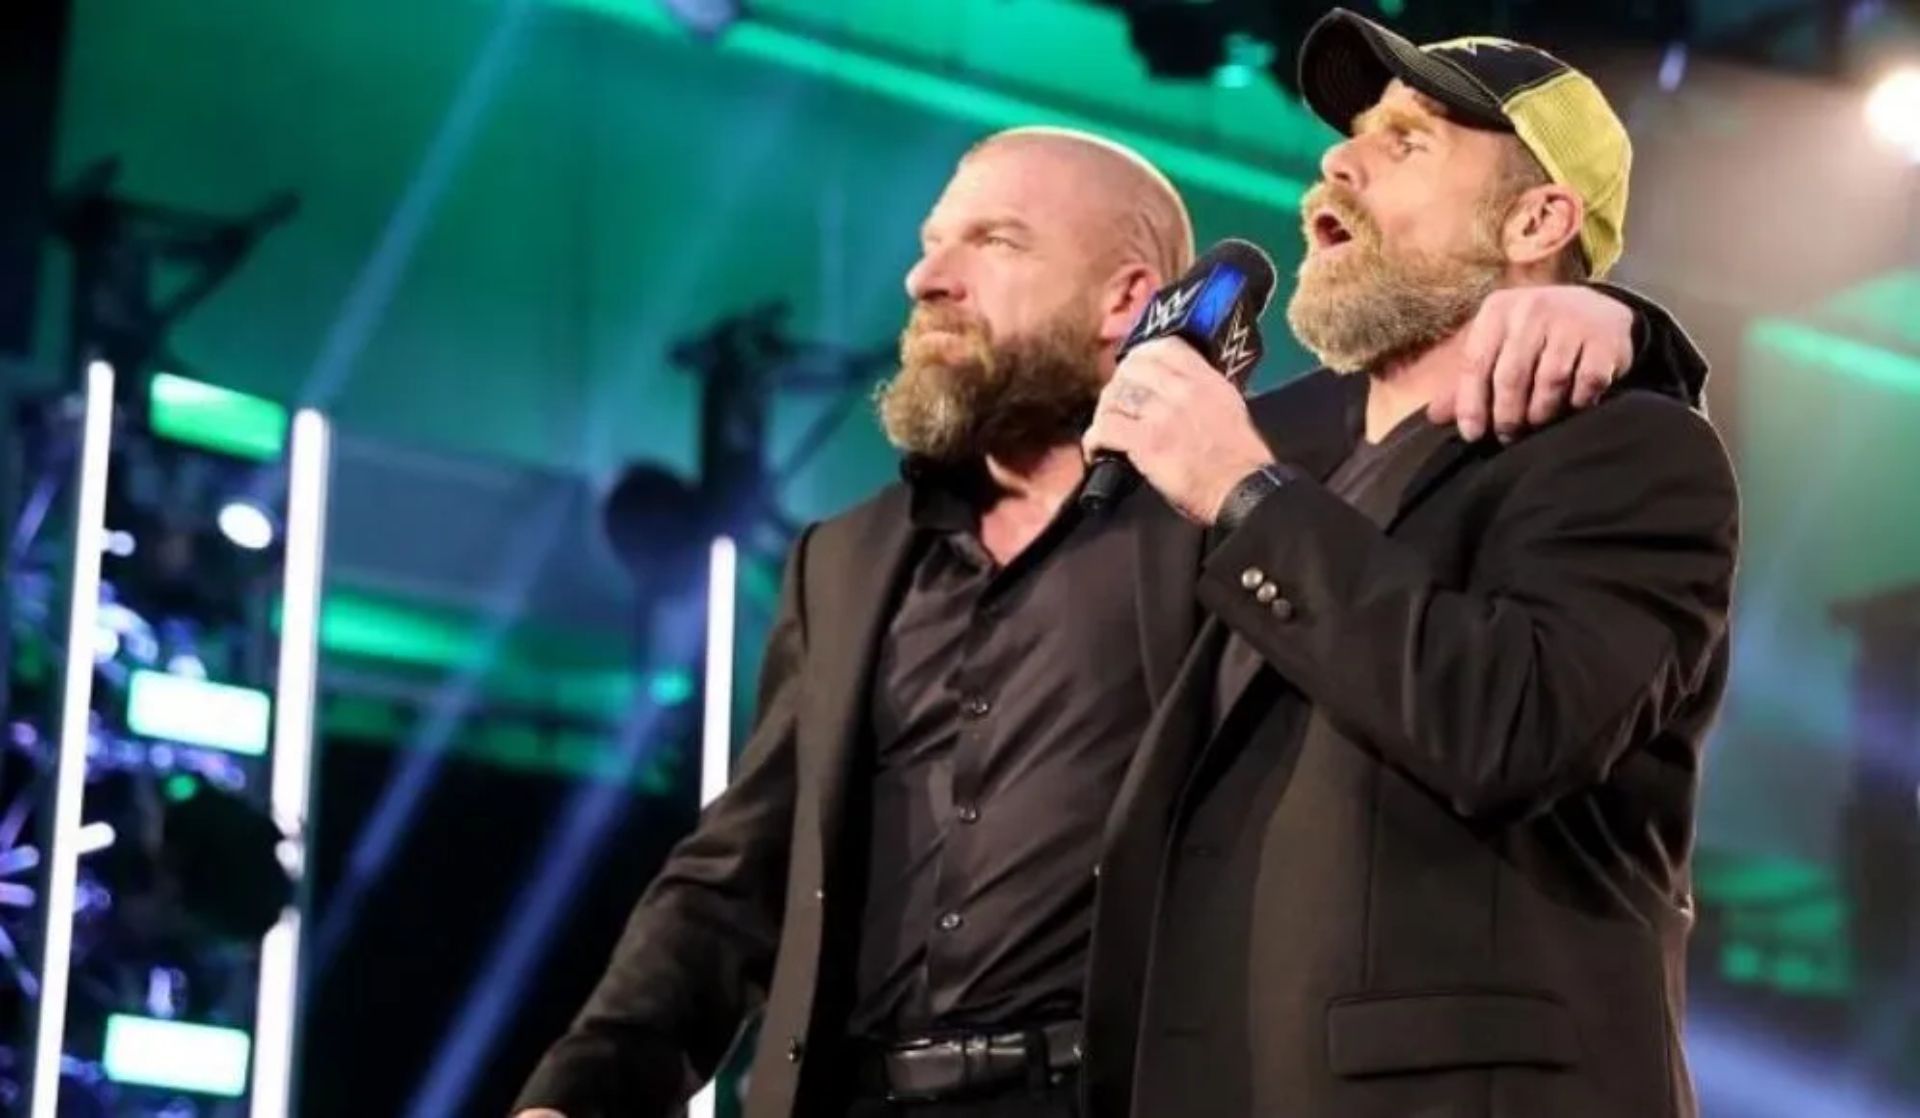 The DX duo have become vital players backstage for WWE